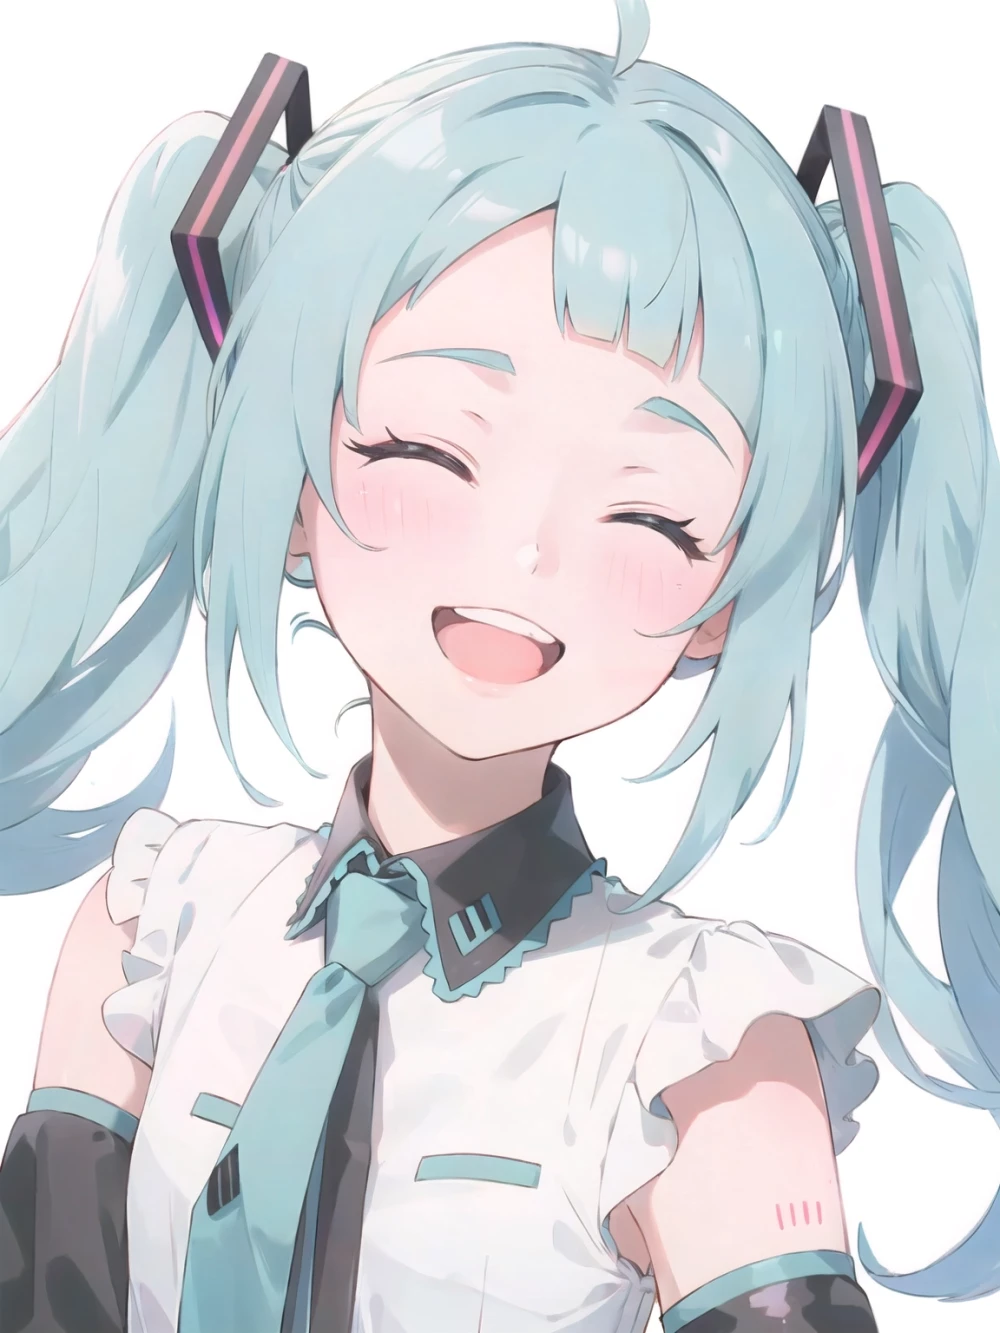 hatsune-miku-anime-style-all-ages-2-2